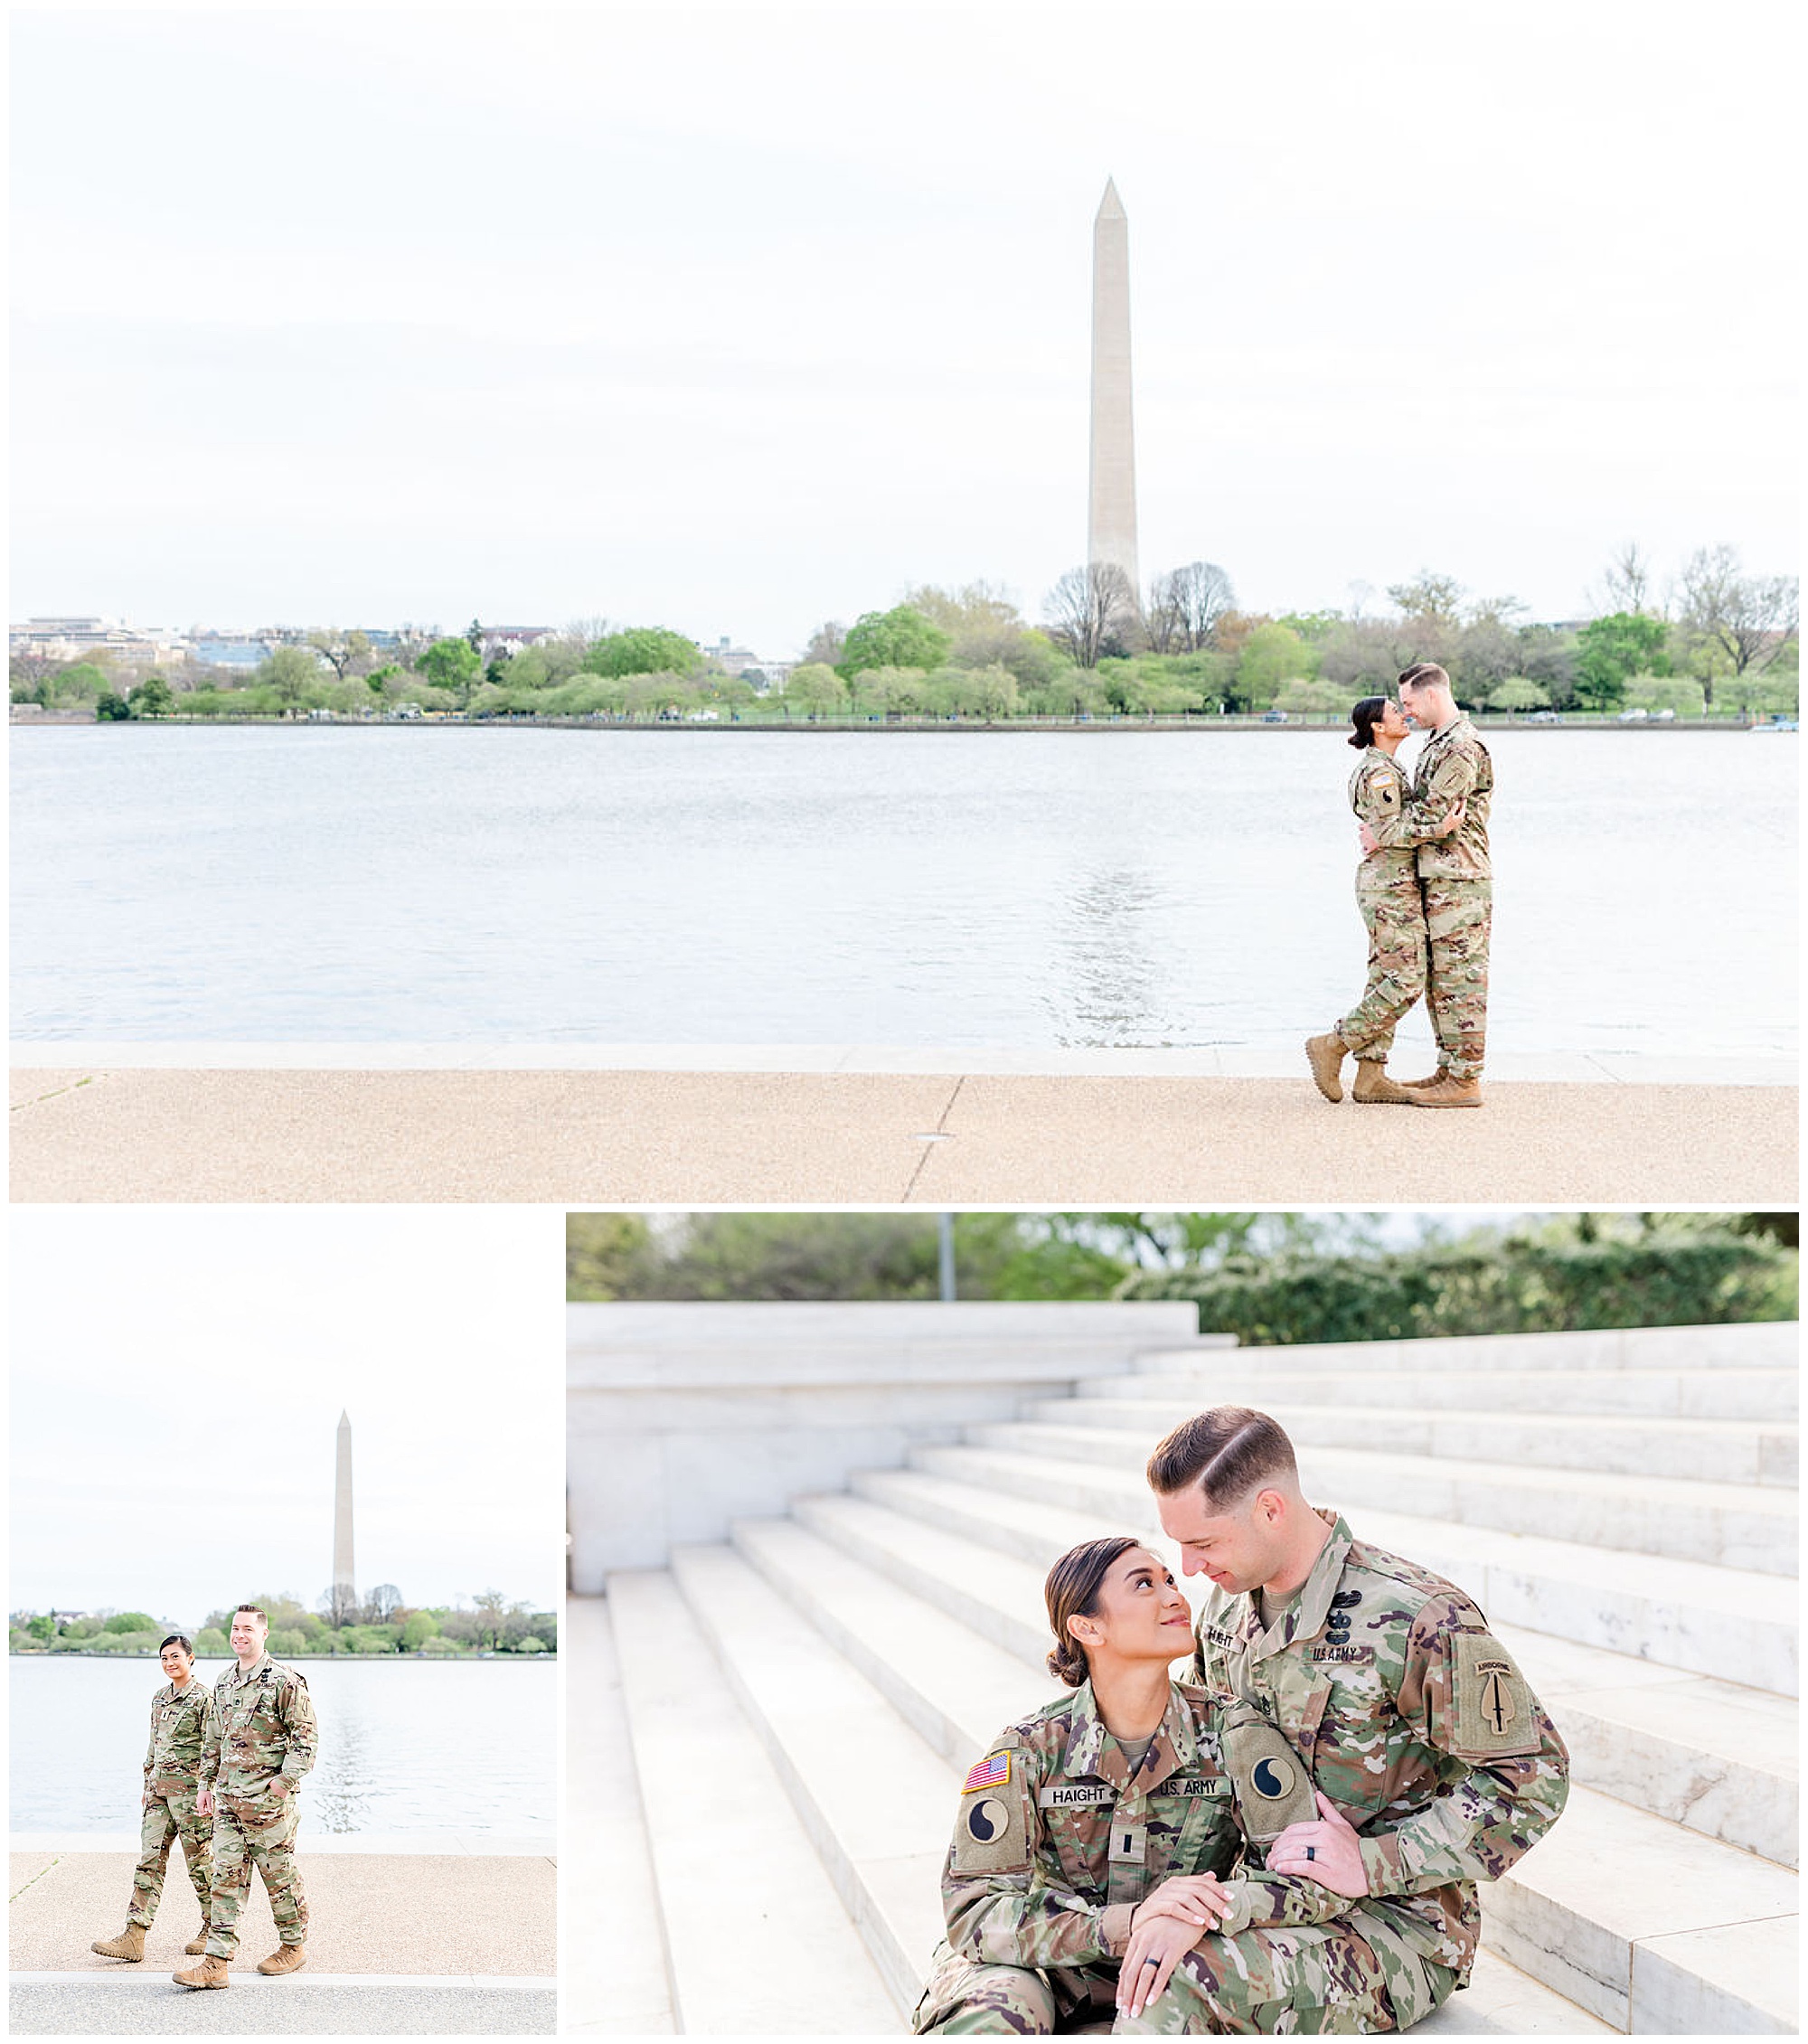 kwanzan cherry blossom portraits, Army couple, D.C. cherry blossom portraits, love birds, romantic portraits, couple goals, military couple, D.C. cherry blossoms photos, spring portraits, newlywed portraits, Rachel E.H. Photography, couple sitting on steps, couple holding hands, couple walking, couple almost kissing